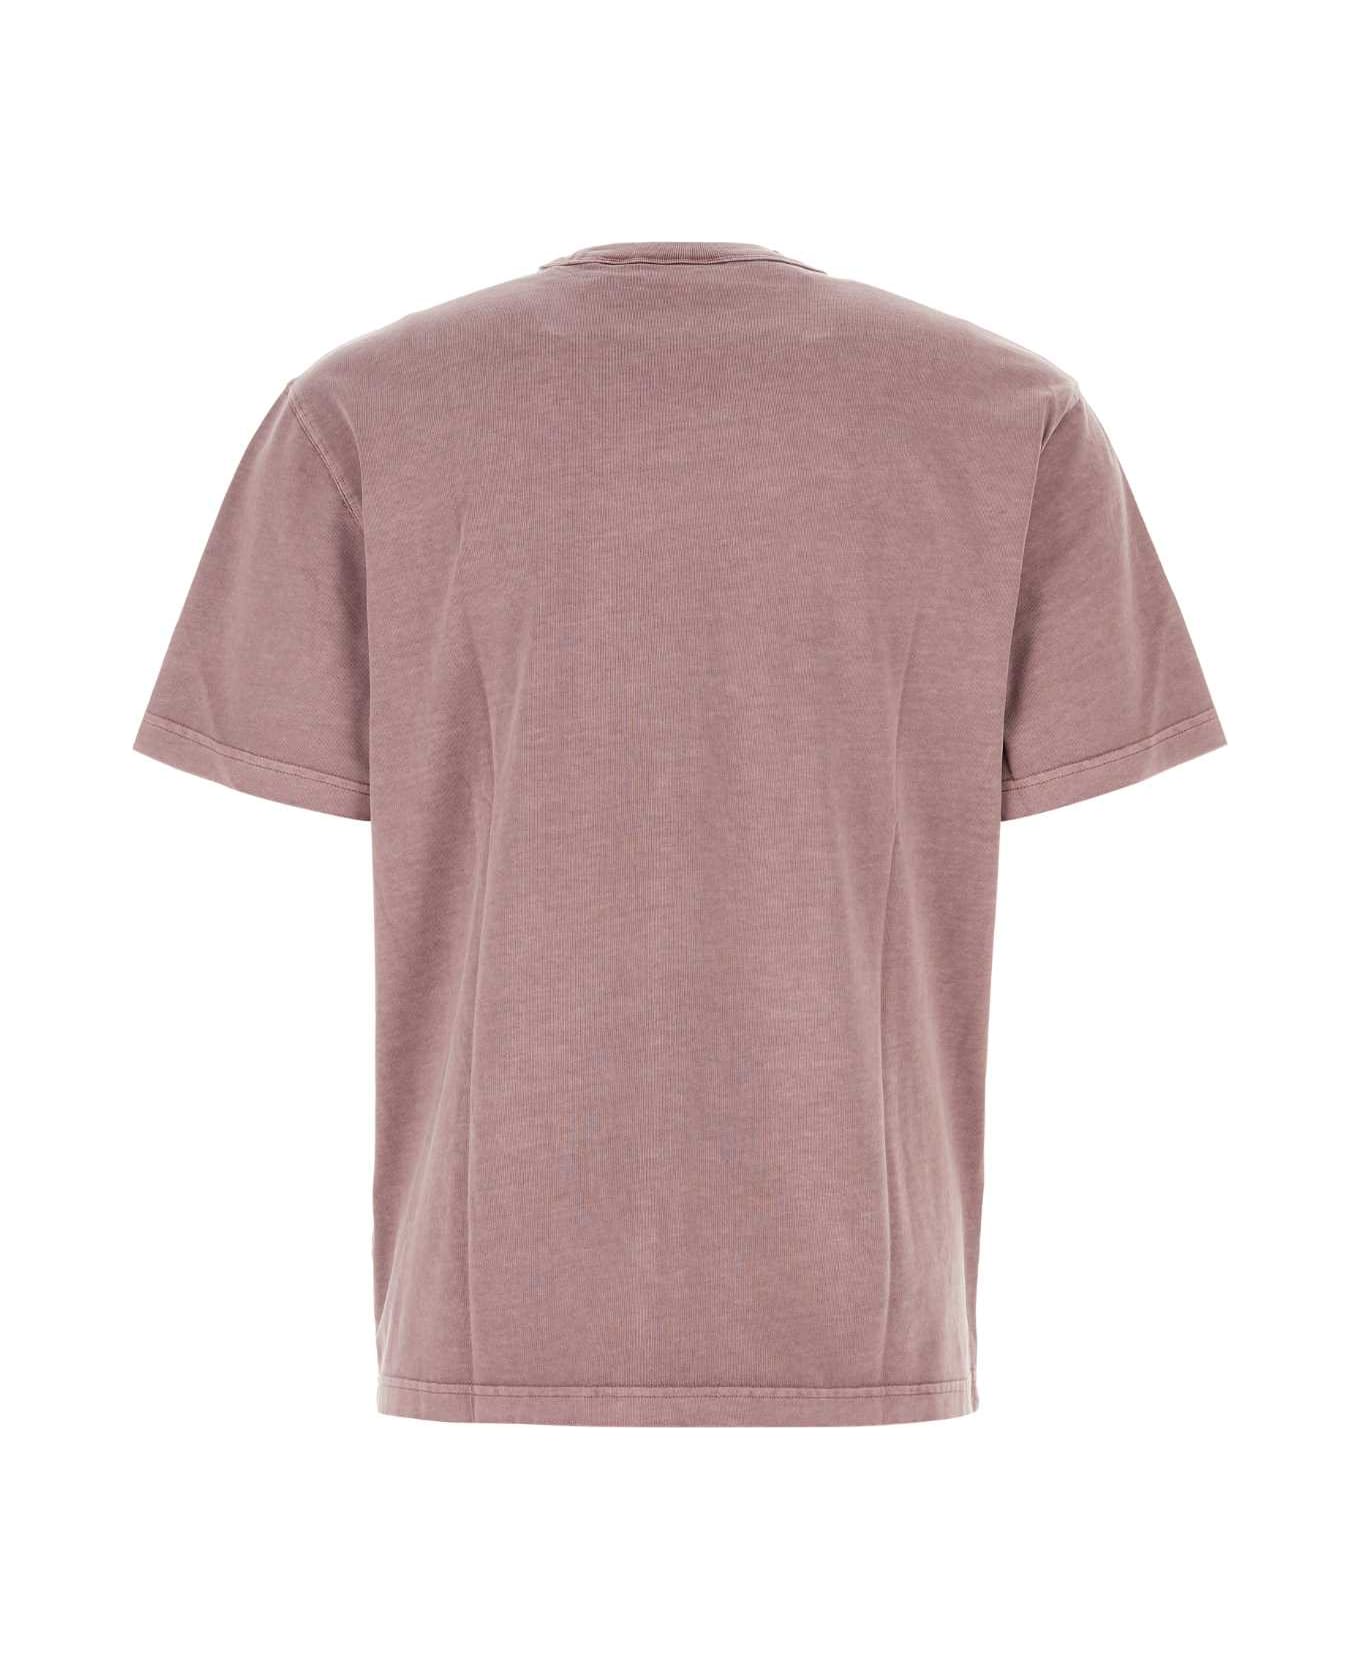 Carhartt Antiqued Pink Cotton S/s Taos T-shirt - VACOUVER